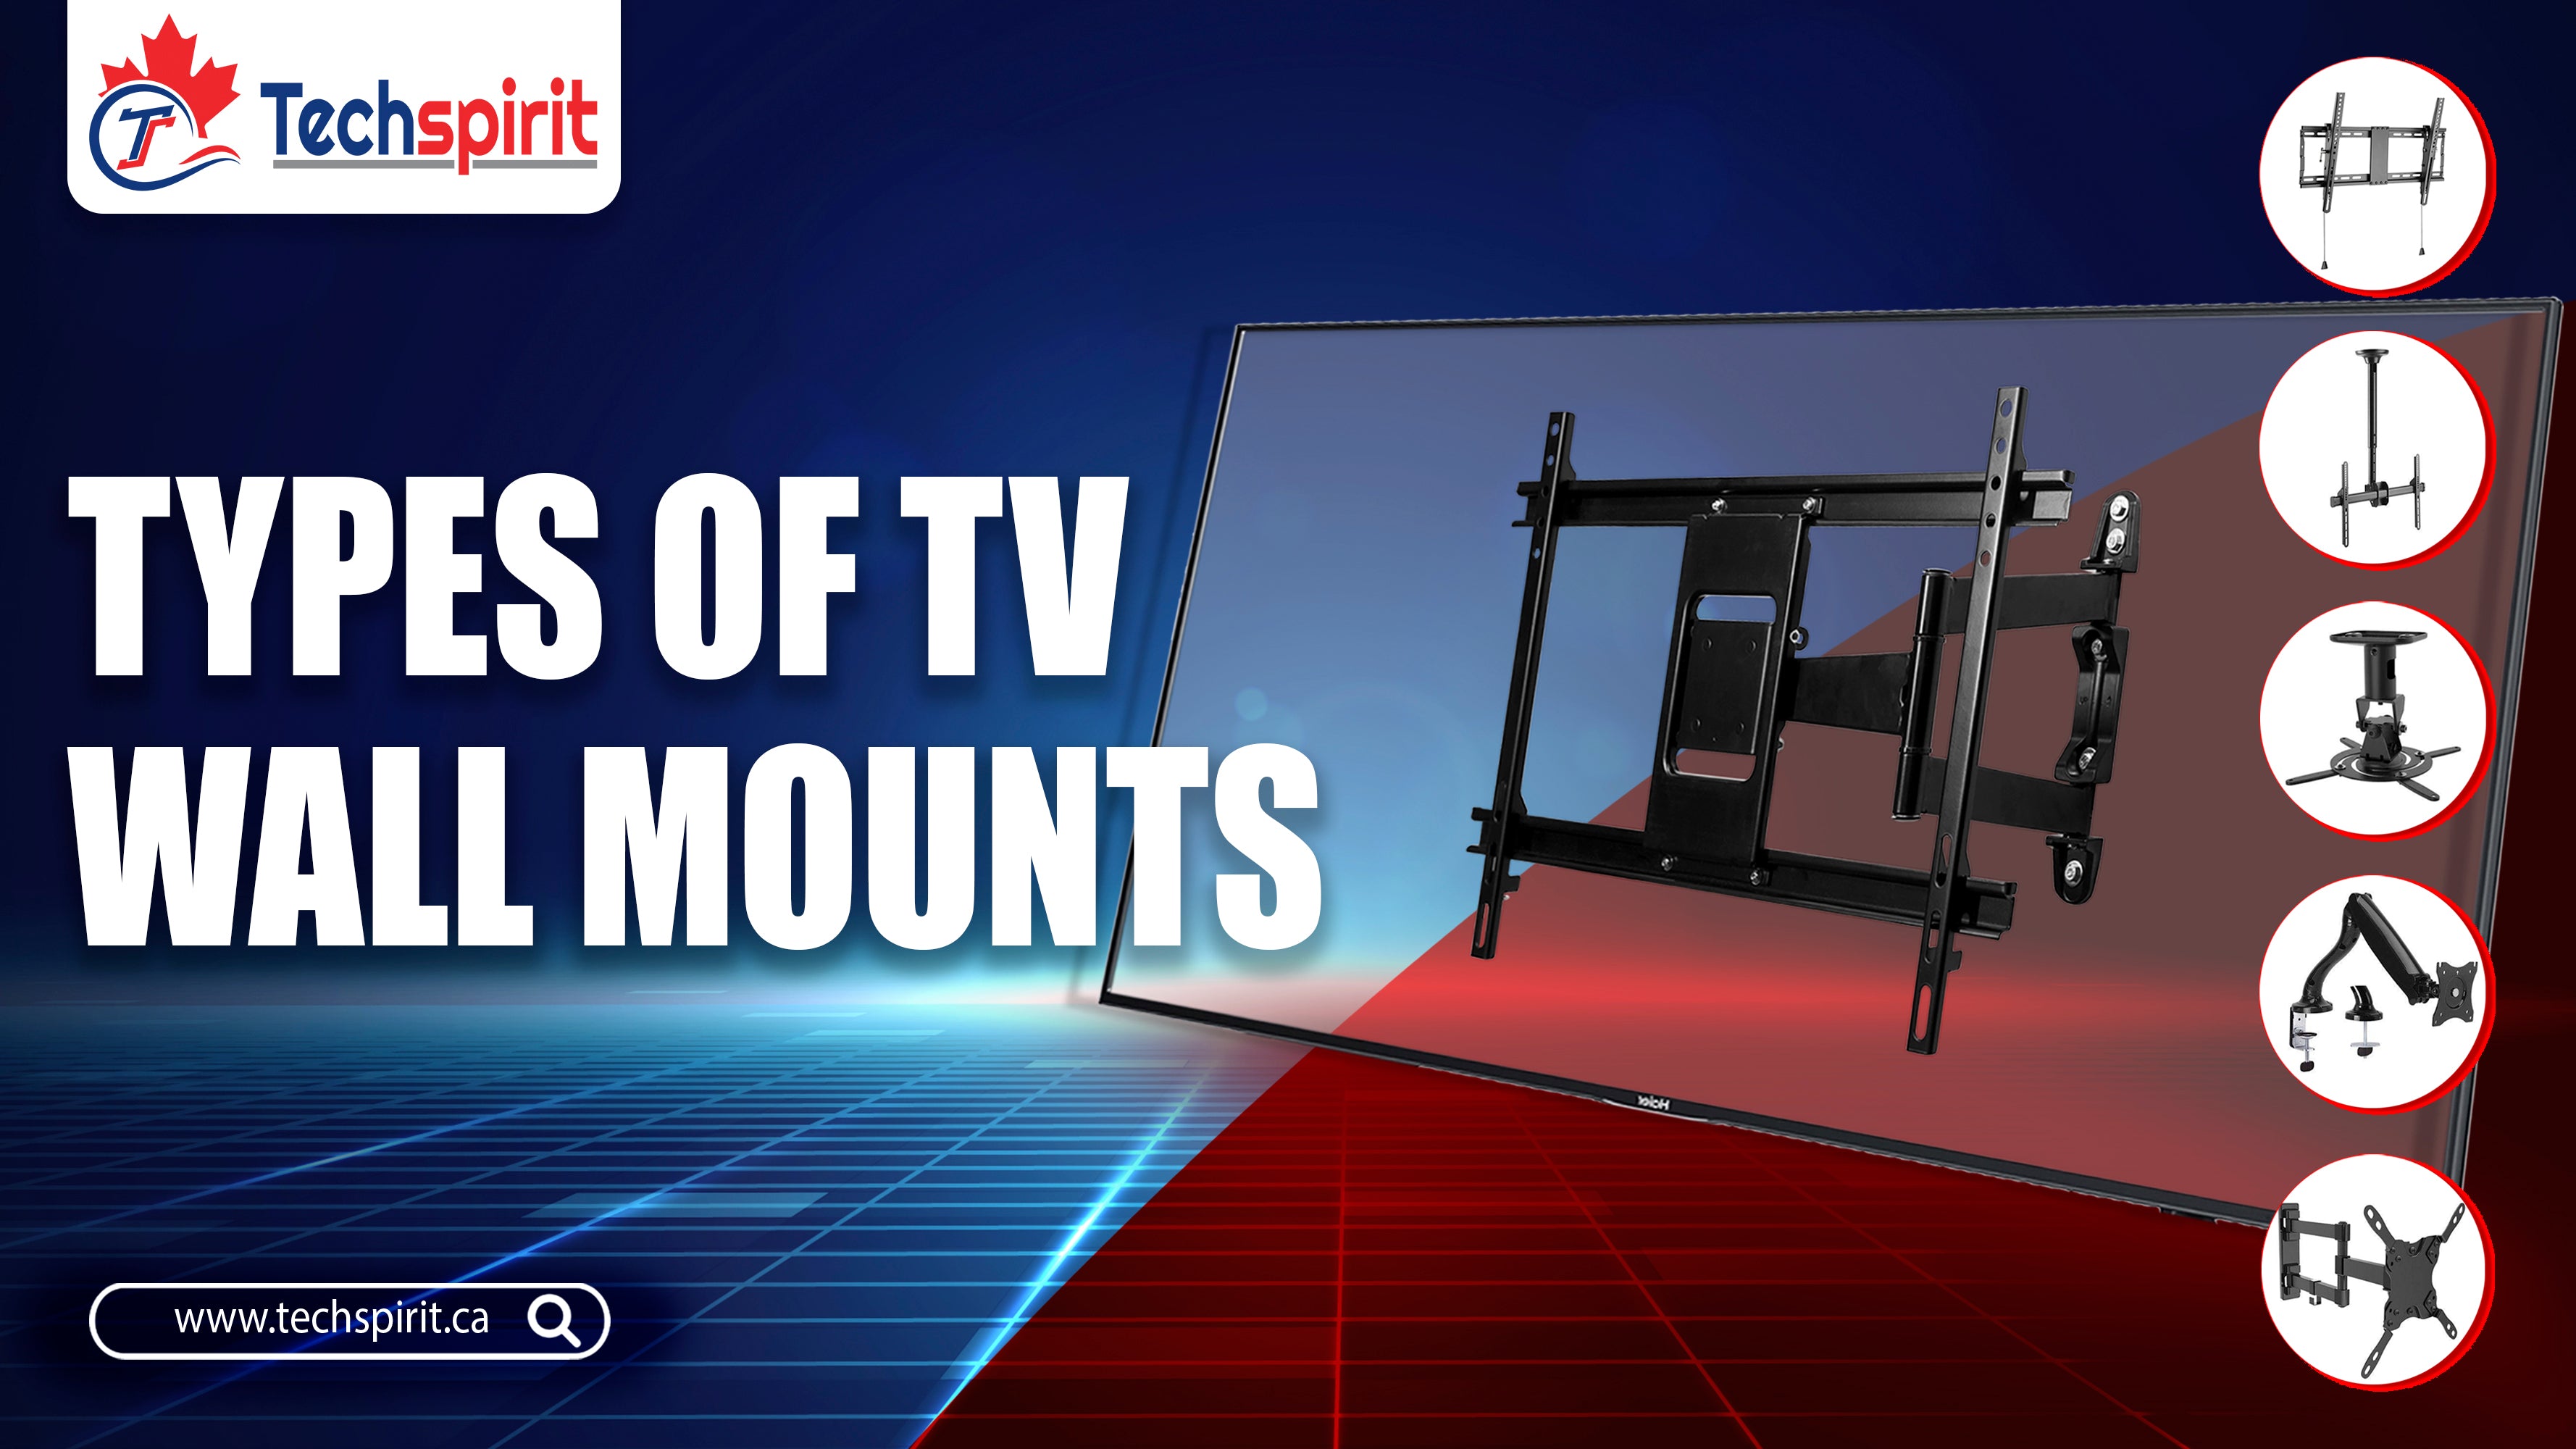 Types of TV Wall Mounts